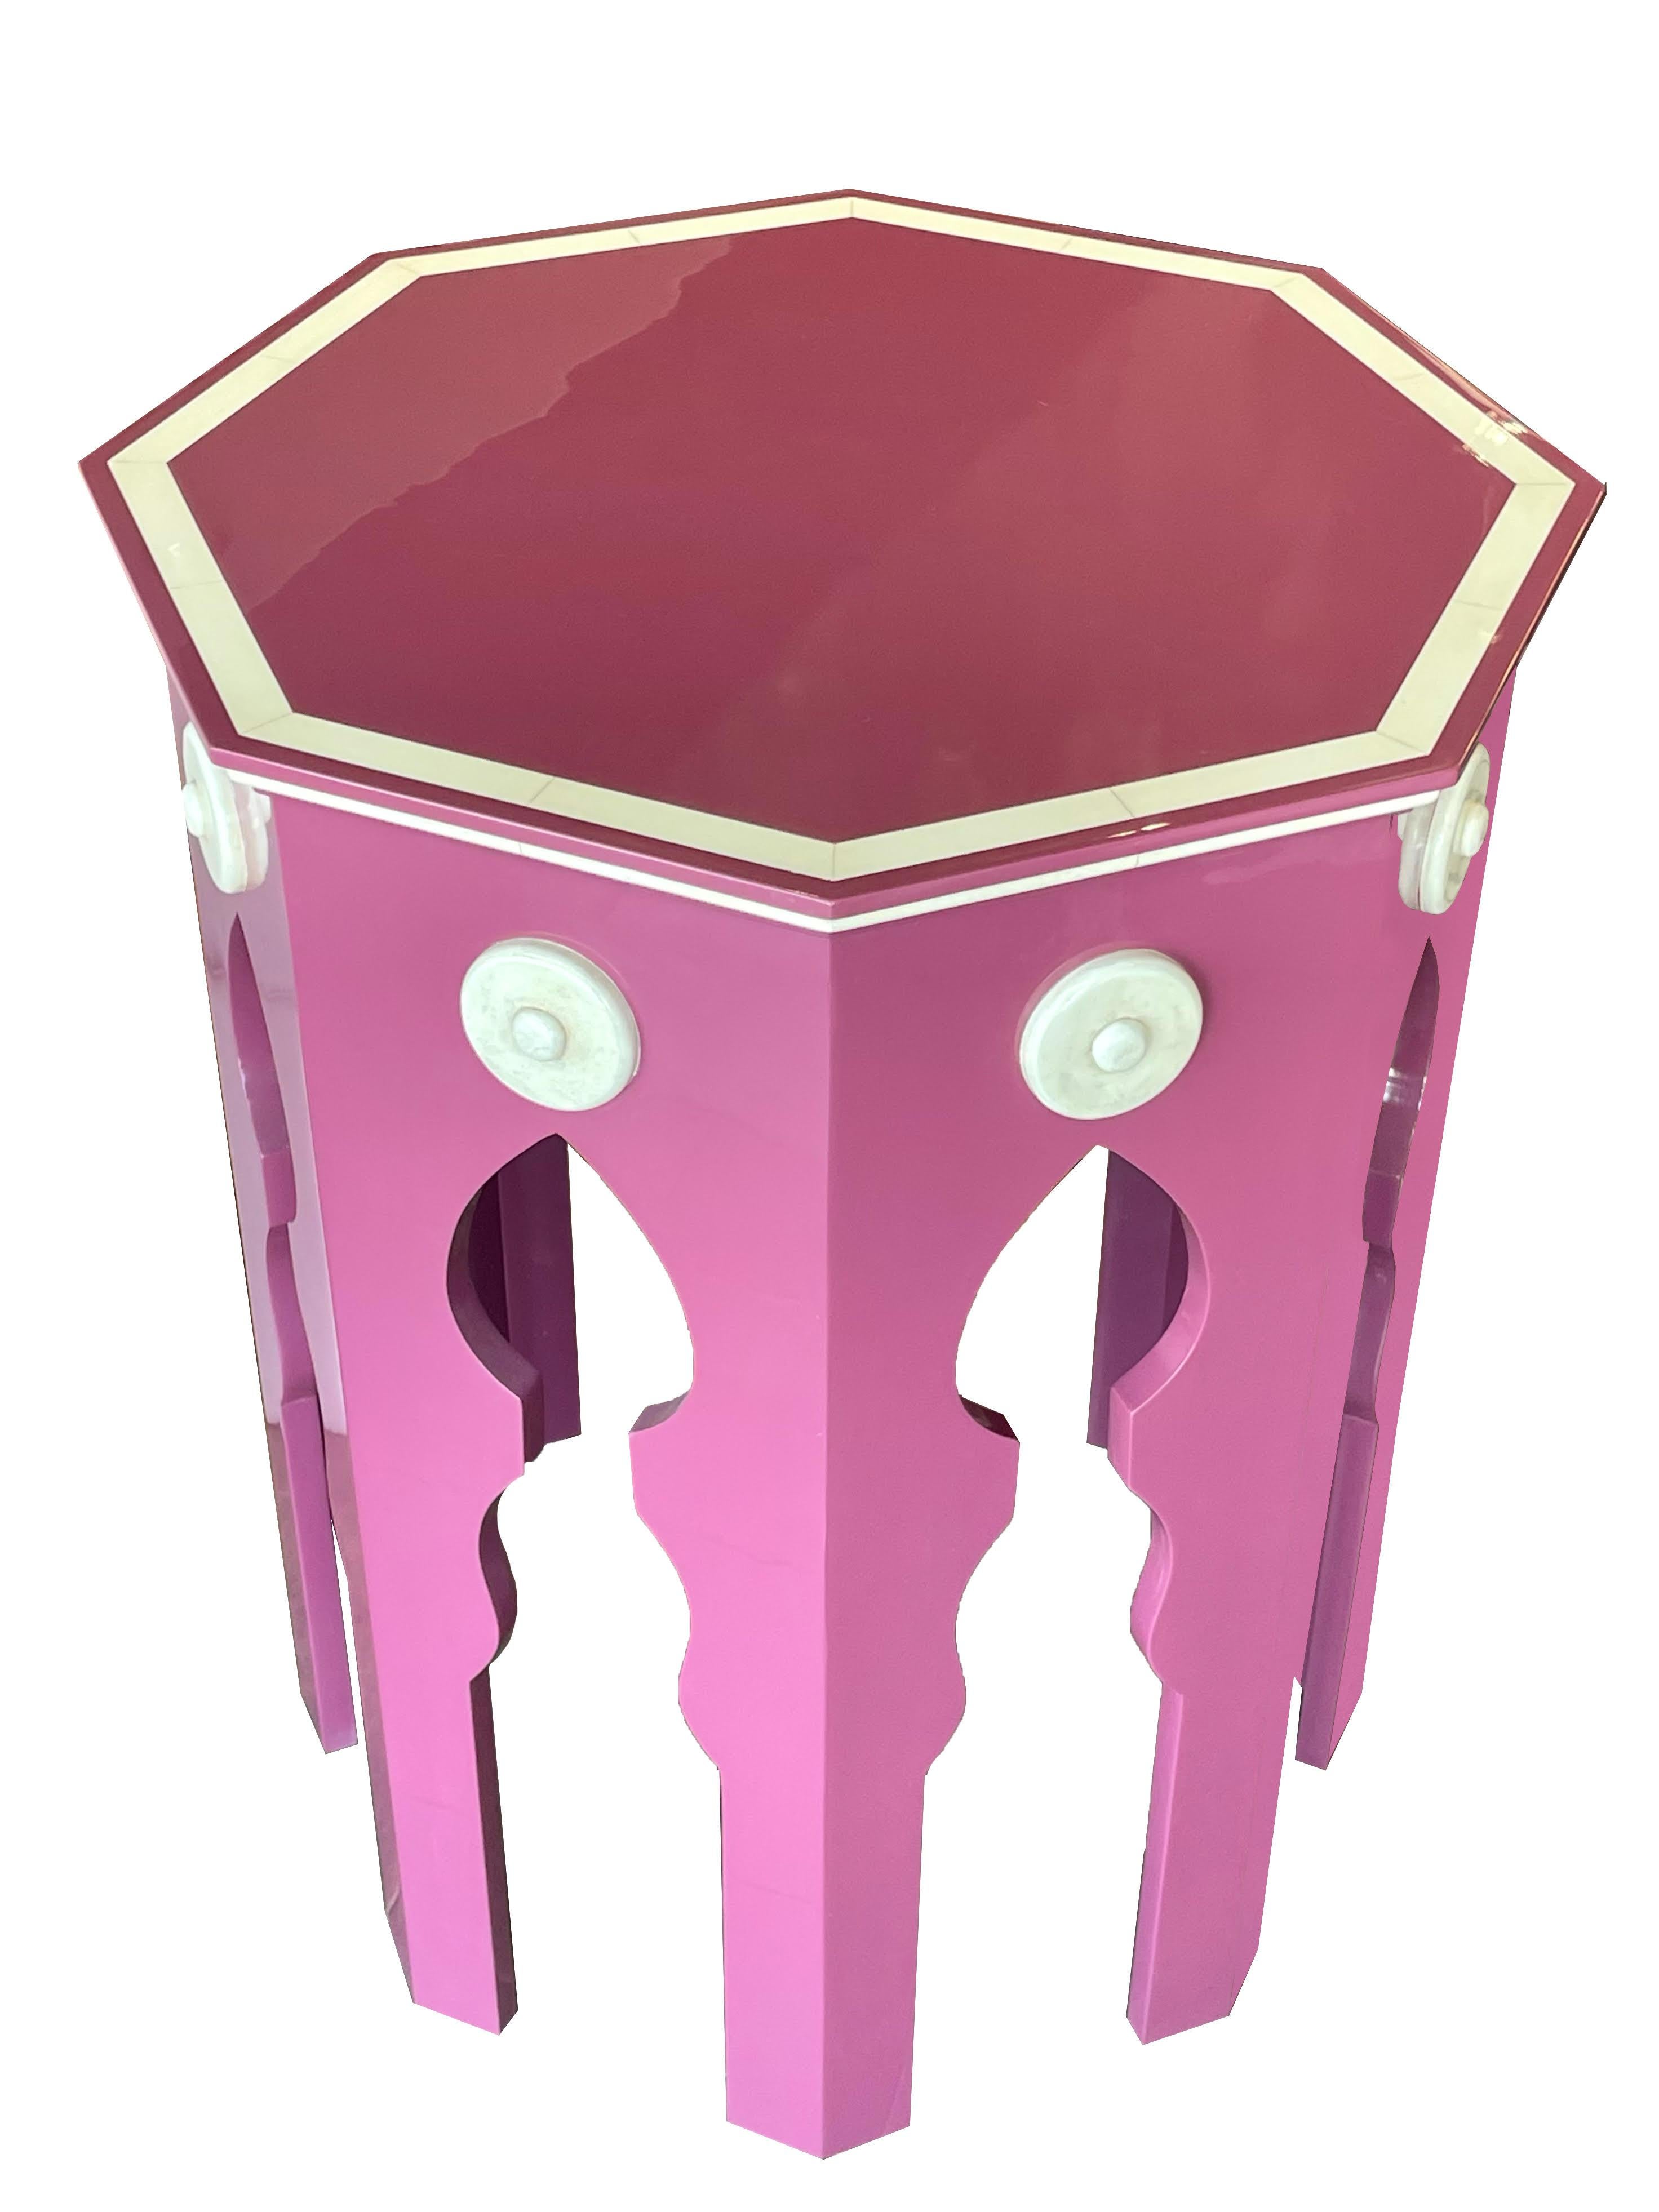 MLB Pink lacquered side table, custom designed by Martyn Lawrence Bullard
Inspired by the silhouette of the Moroccan Tea Table




